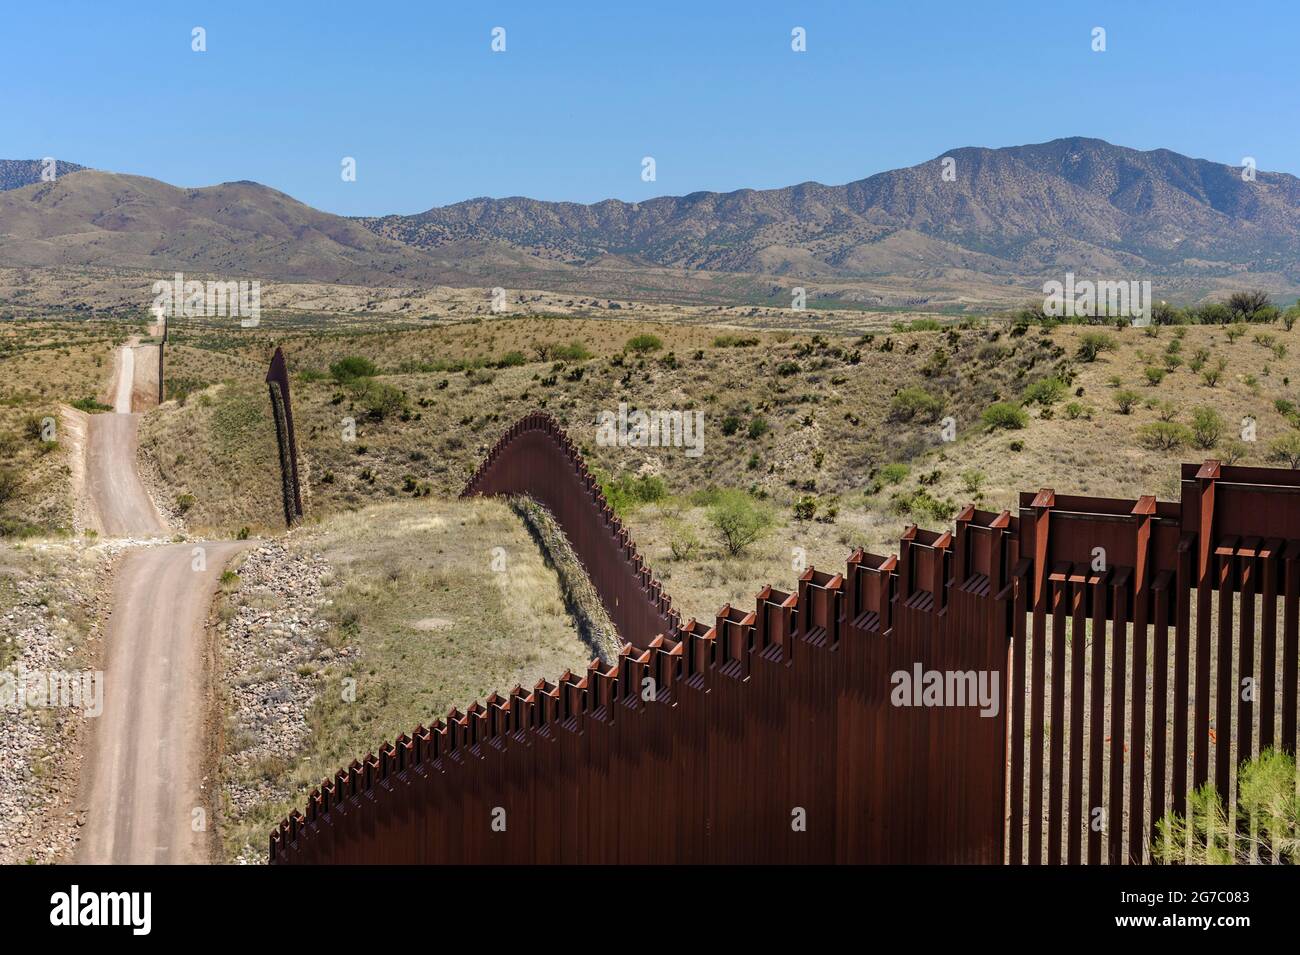 US border fence on the Mexico border, east of Nogales Arizona USA, and Nogales Sonora Mexico, viewed from US side, showing how the fence follows the t Stock Photo